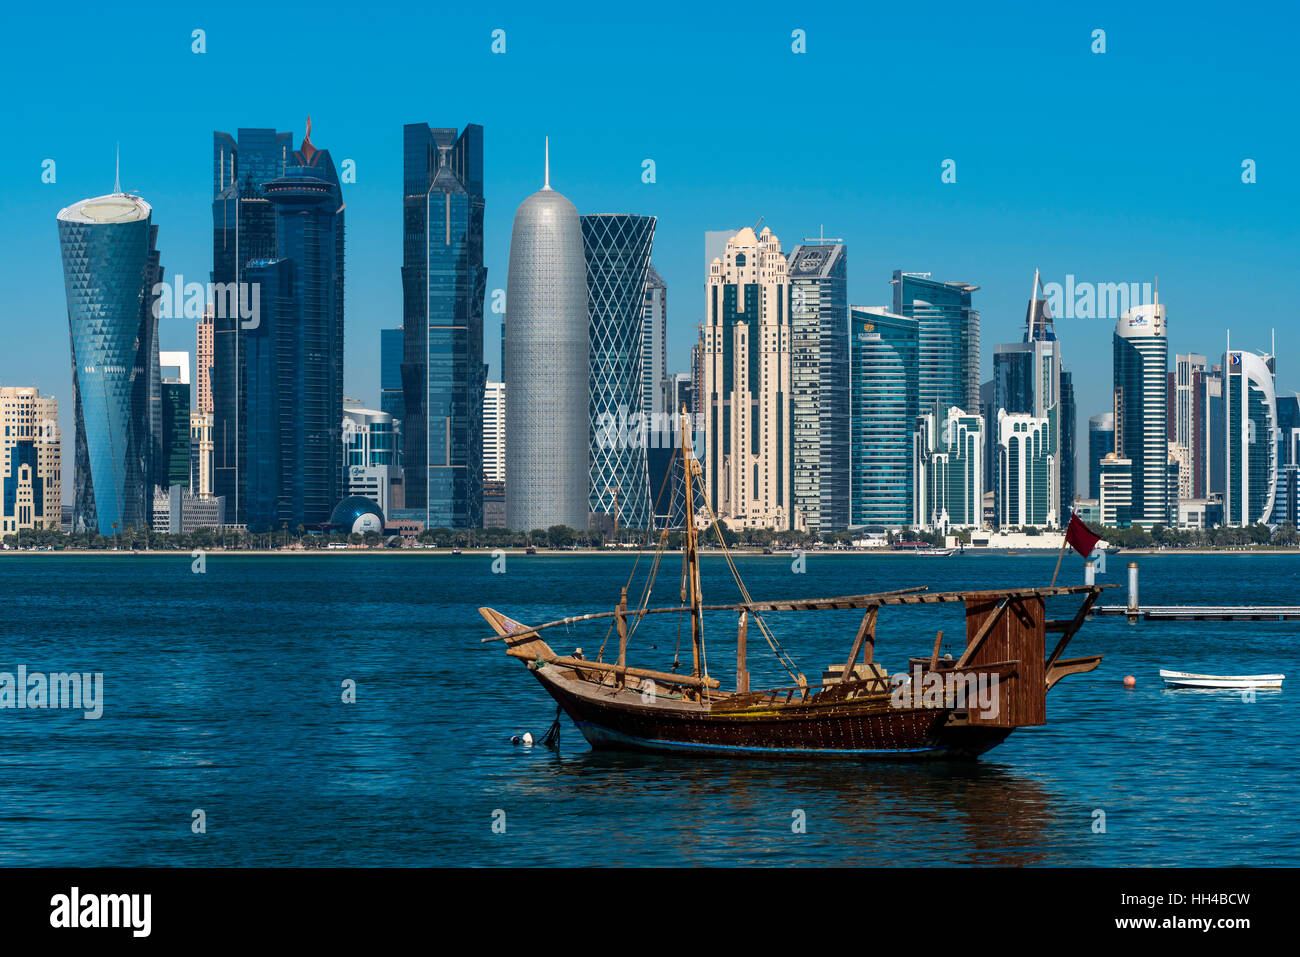 Dhow traditional sailing vessel with the financial area skyline behind, Doha, Qatar Stock Photo